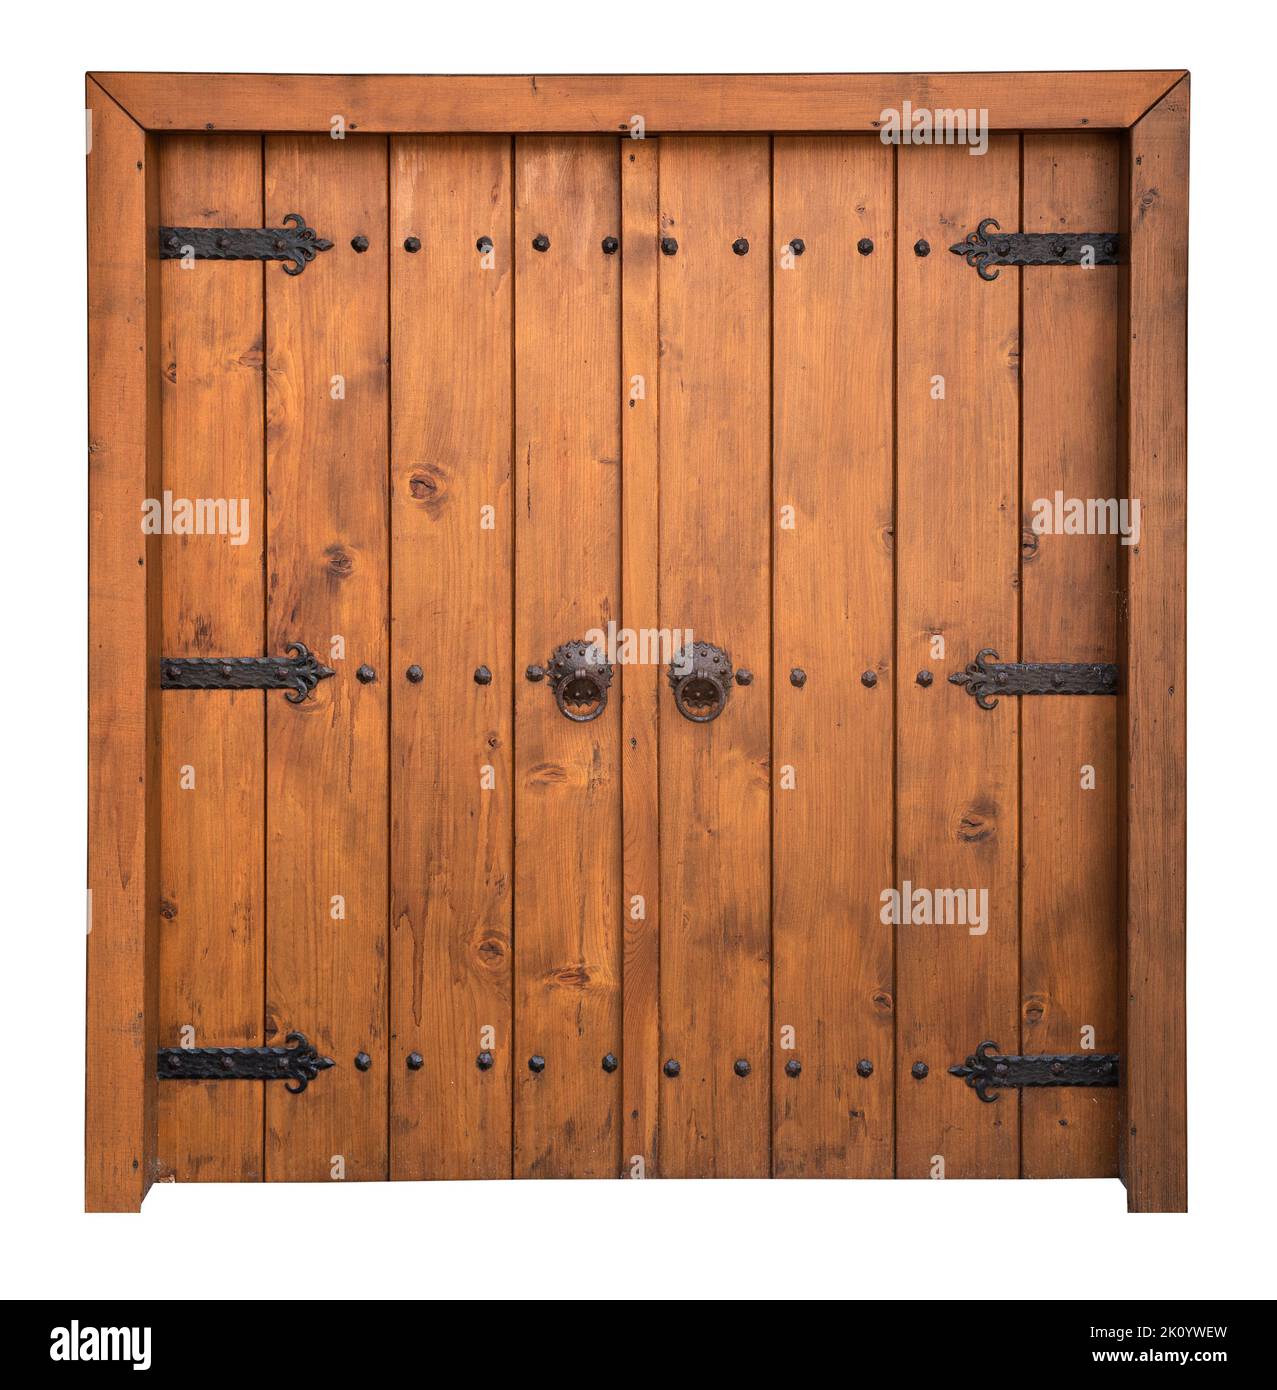 front view closeup of vintage wooden large double barn door with brown wood texture and metallic handle and bolts isolated on white background Stock Photo